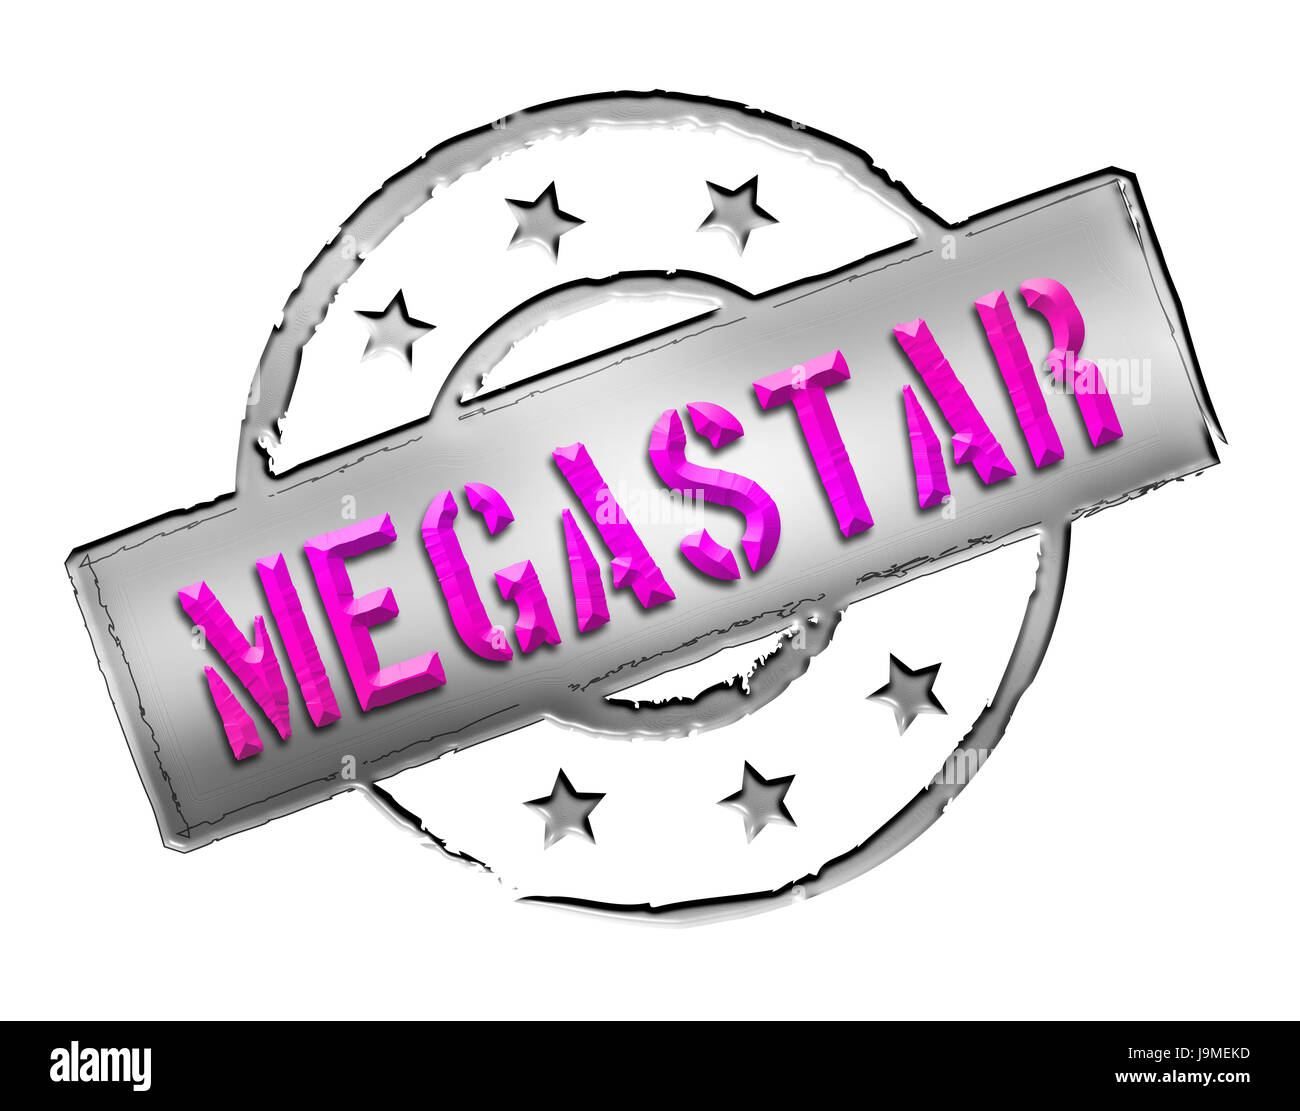 Megastar Cut Out Stock Images & Pictures - Alamy